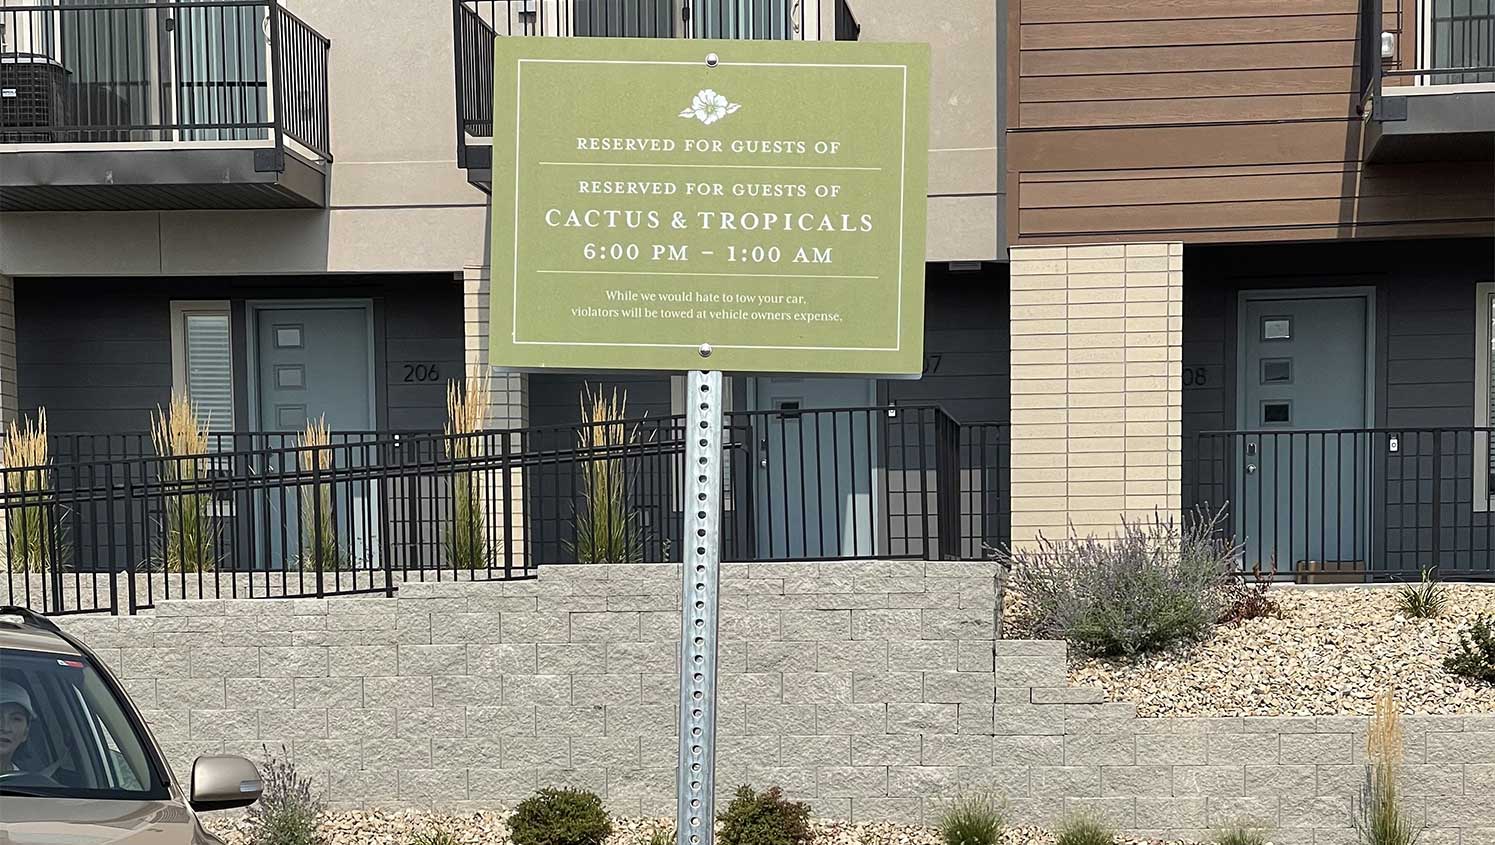 up-close view of reserved parking sign at Cactus & Tropicals in Draper, UT